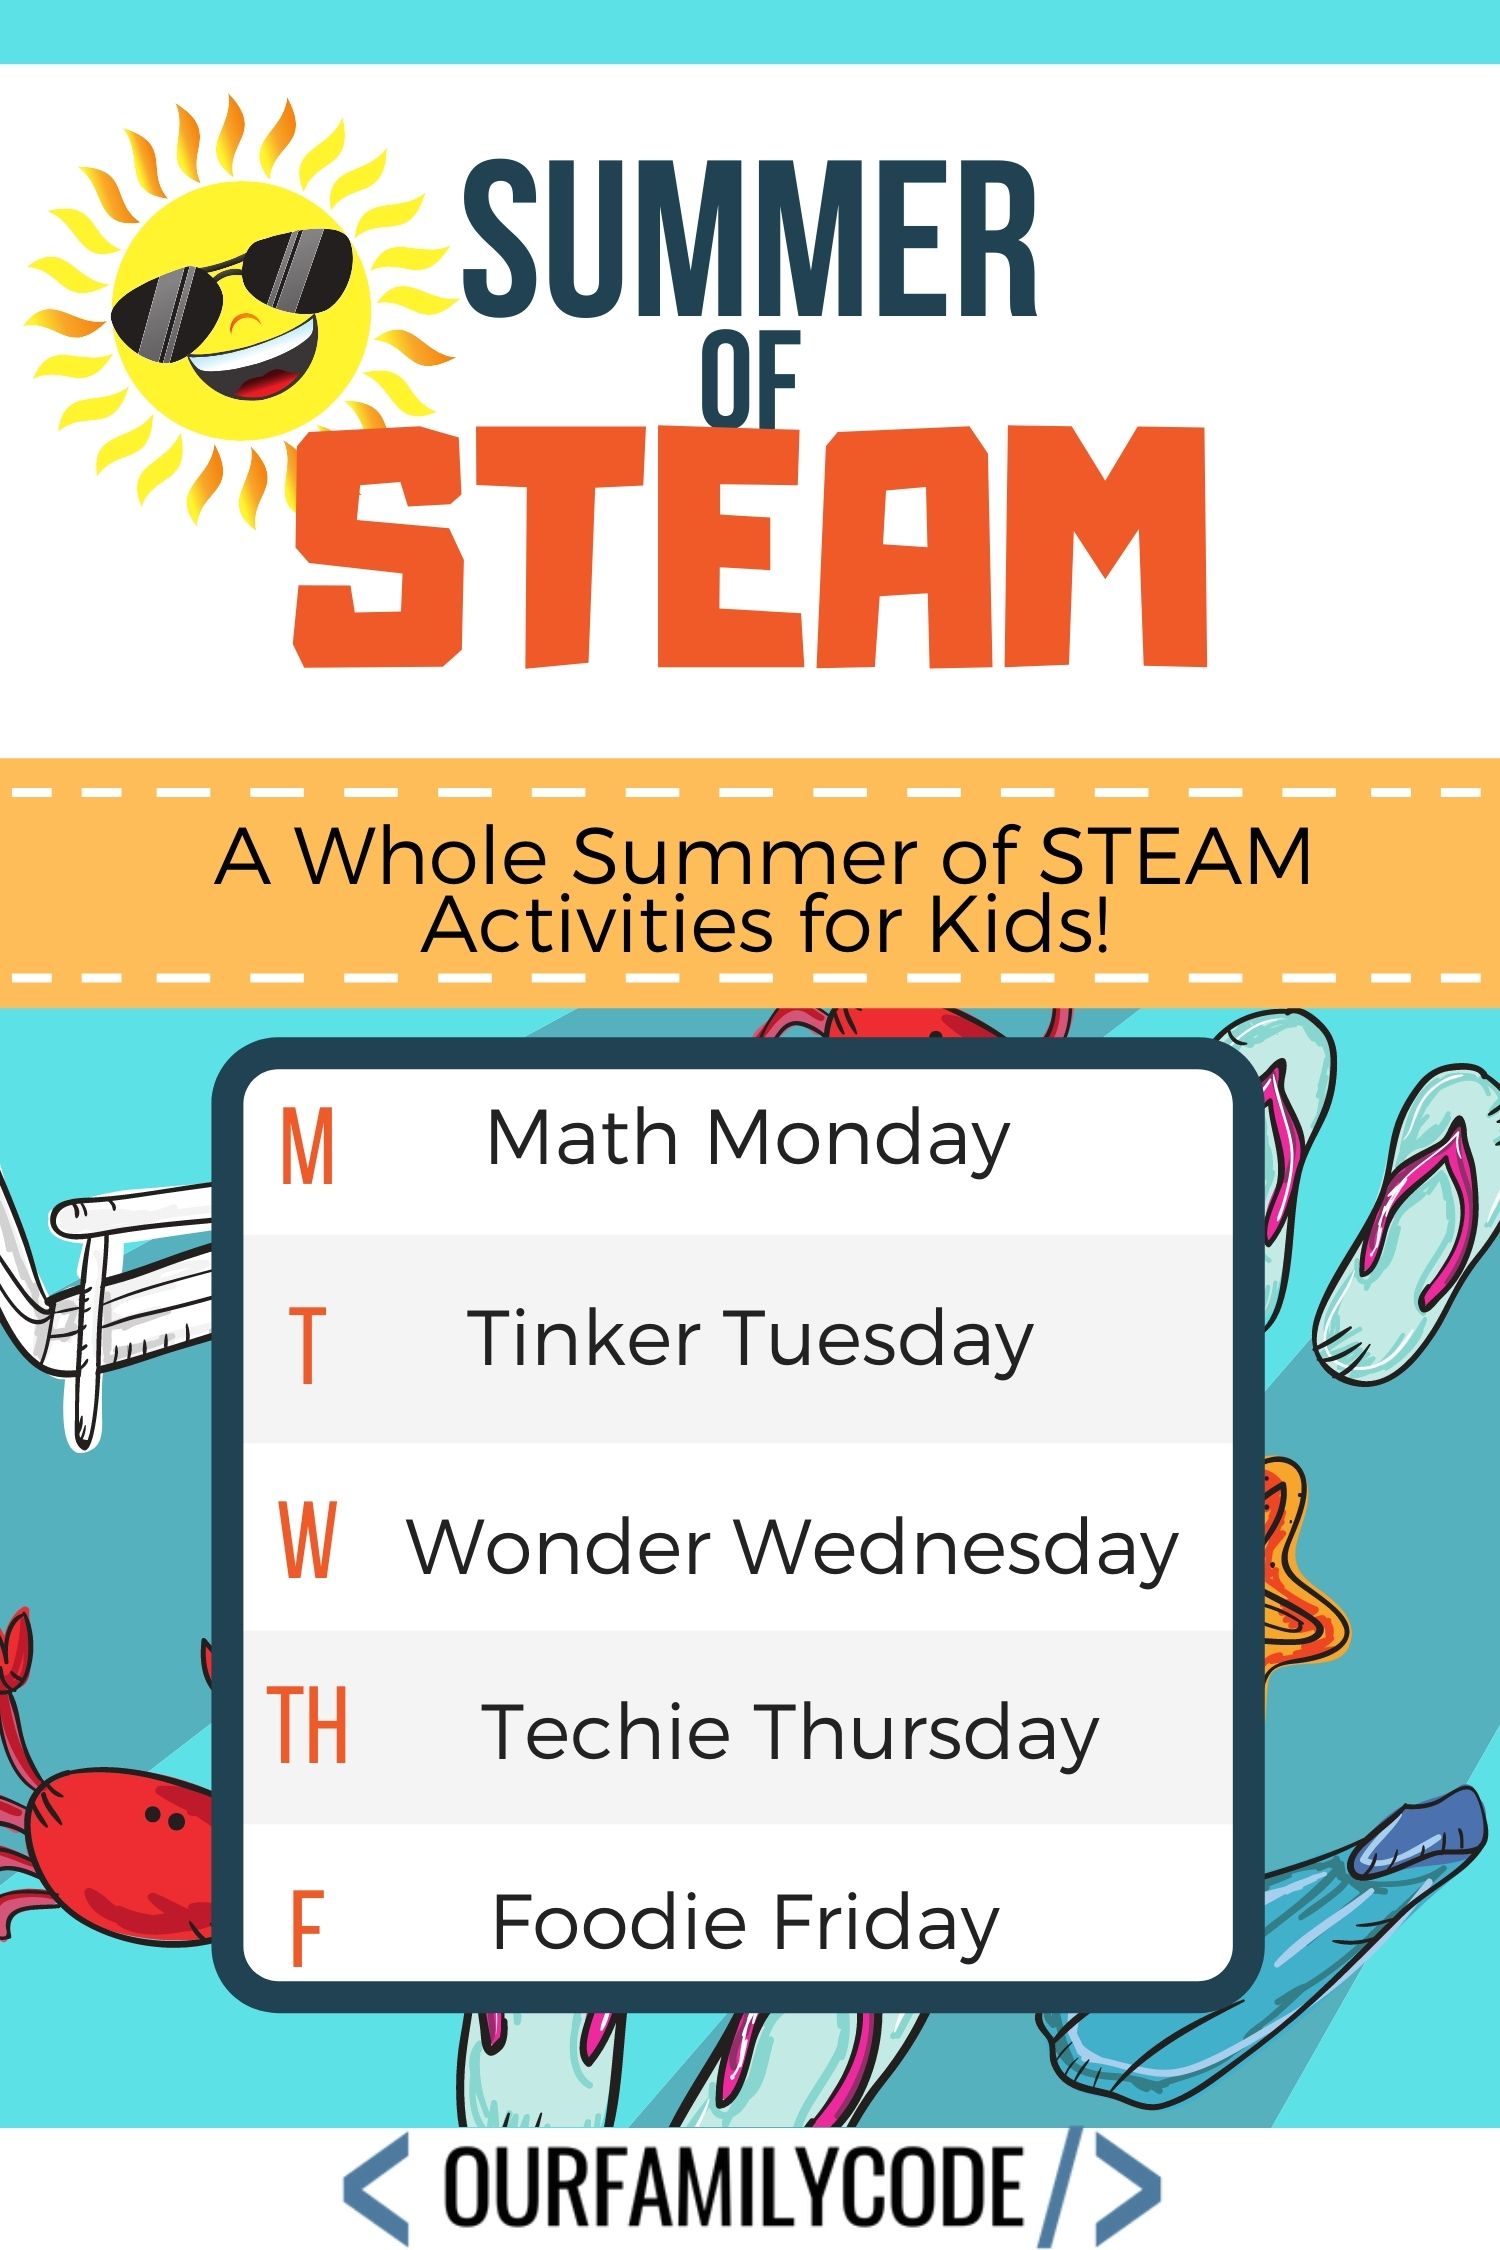 Summer of STEAM activities for kids! 100s of projects for Math Monday, Tinker Tuesday, Wonder Wednesday, Techie Thursday, & Foodie Friday!